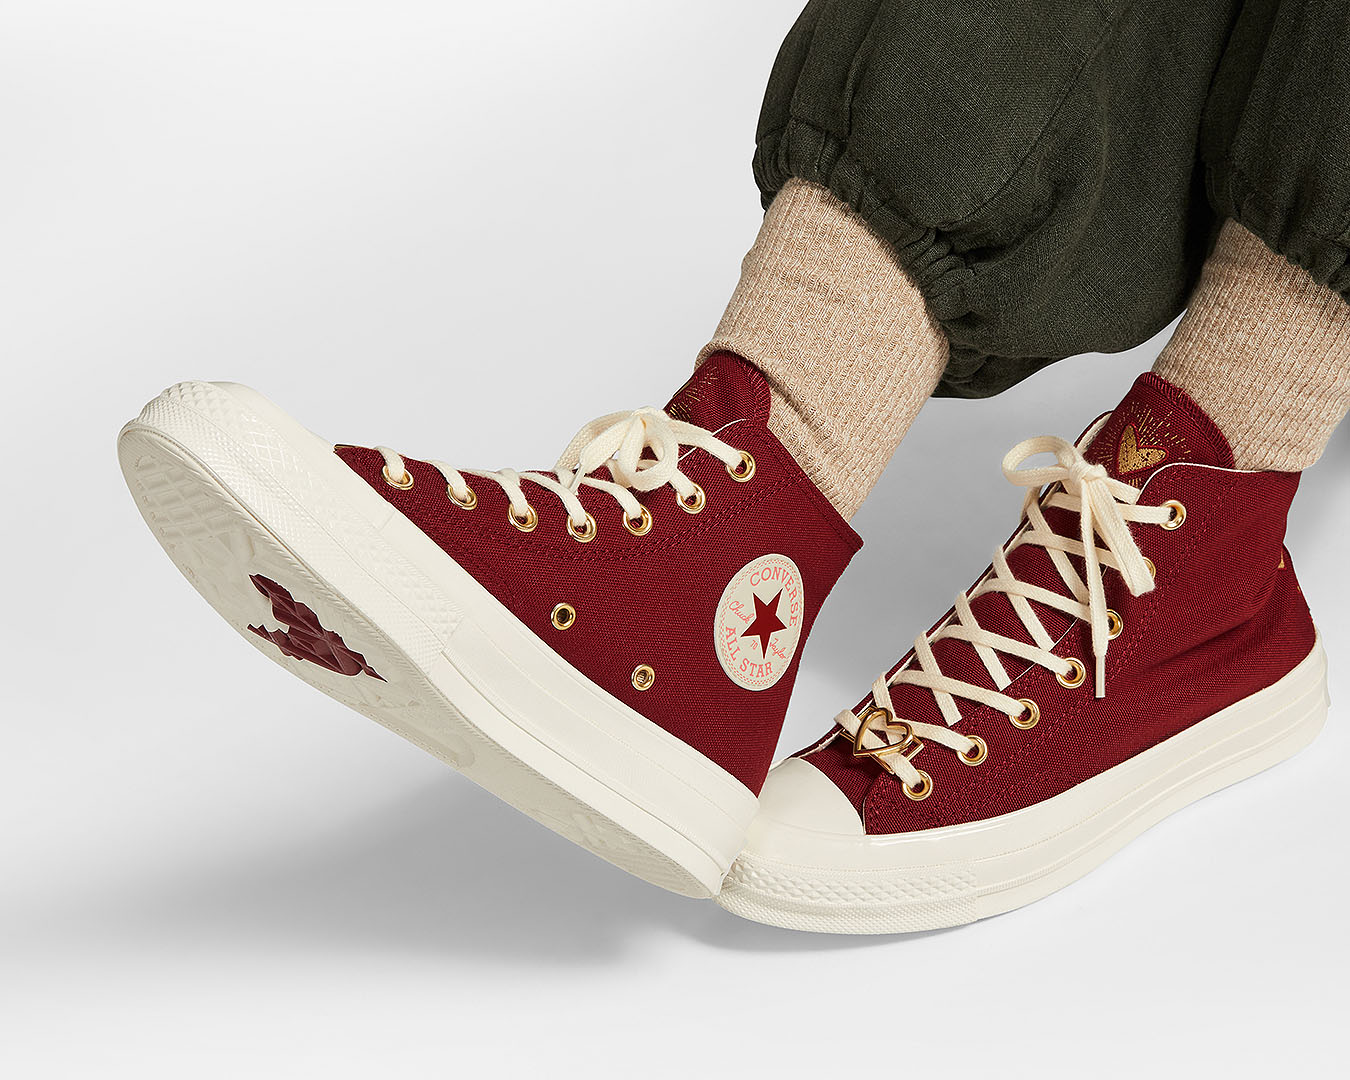 Someone models some nice red kicks from Converse's Valentine's Day edit.